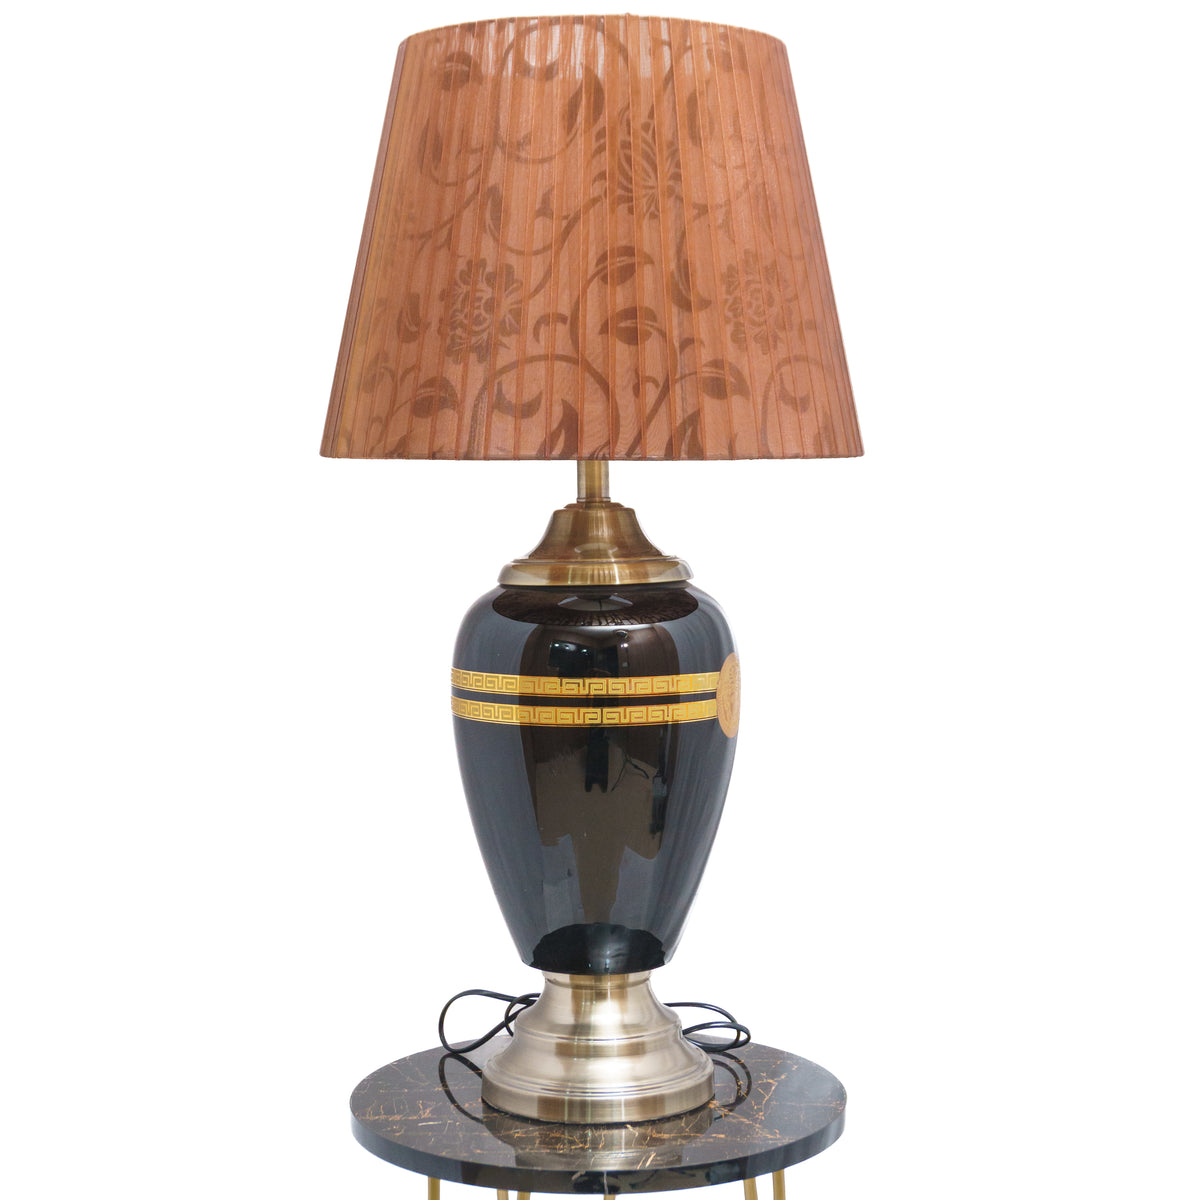 Golden Brown Floral Fabric Lamp Shade with Black Clarity Theme Lamp Stand